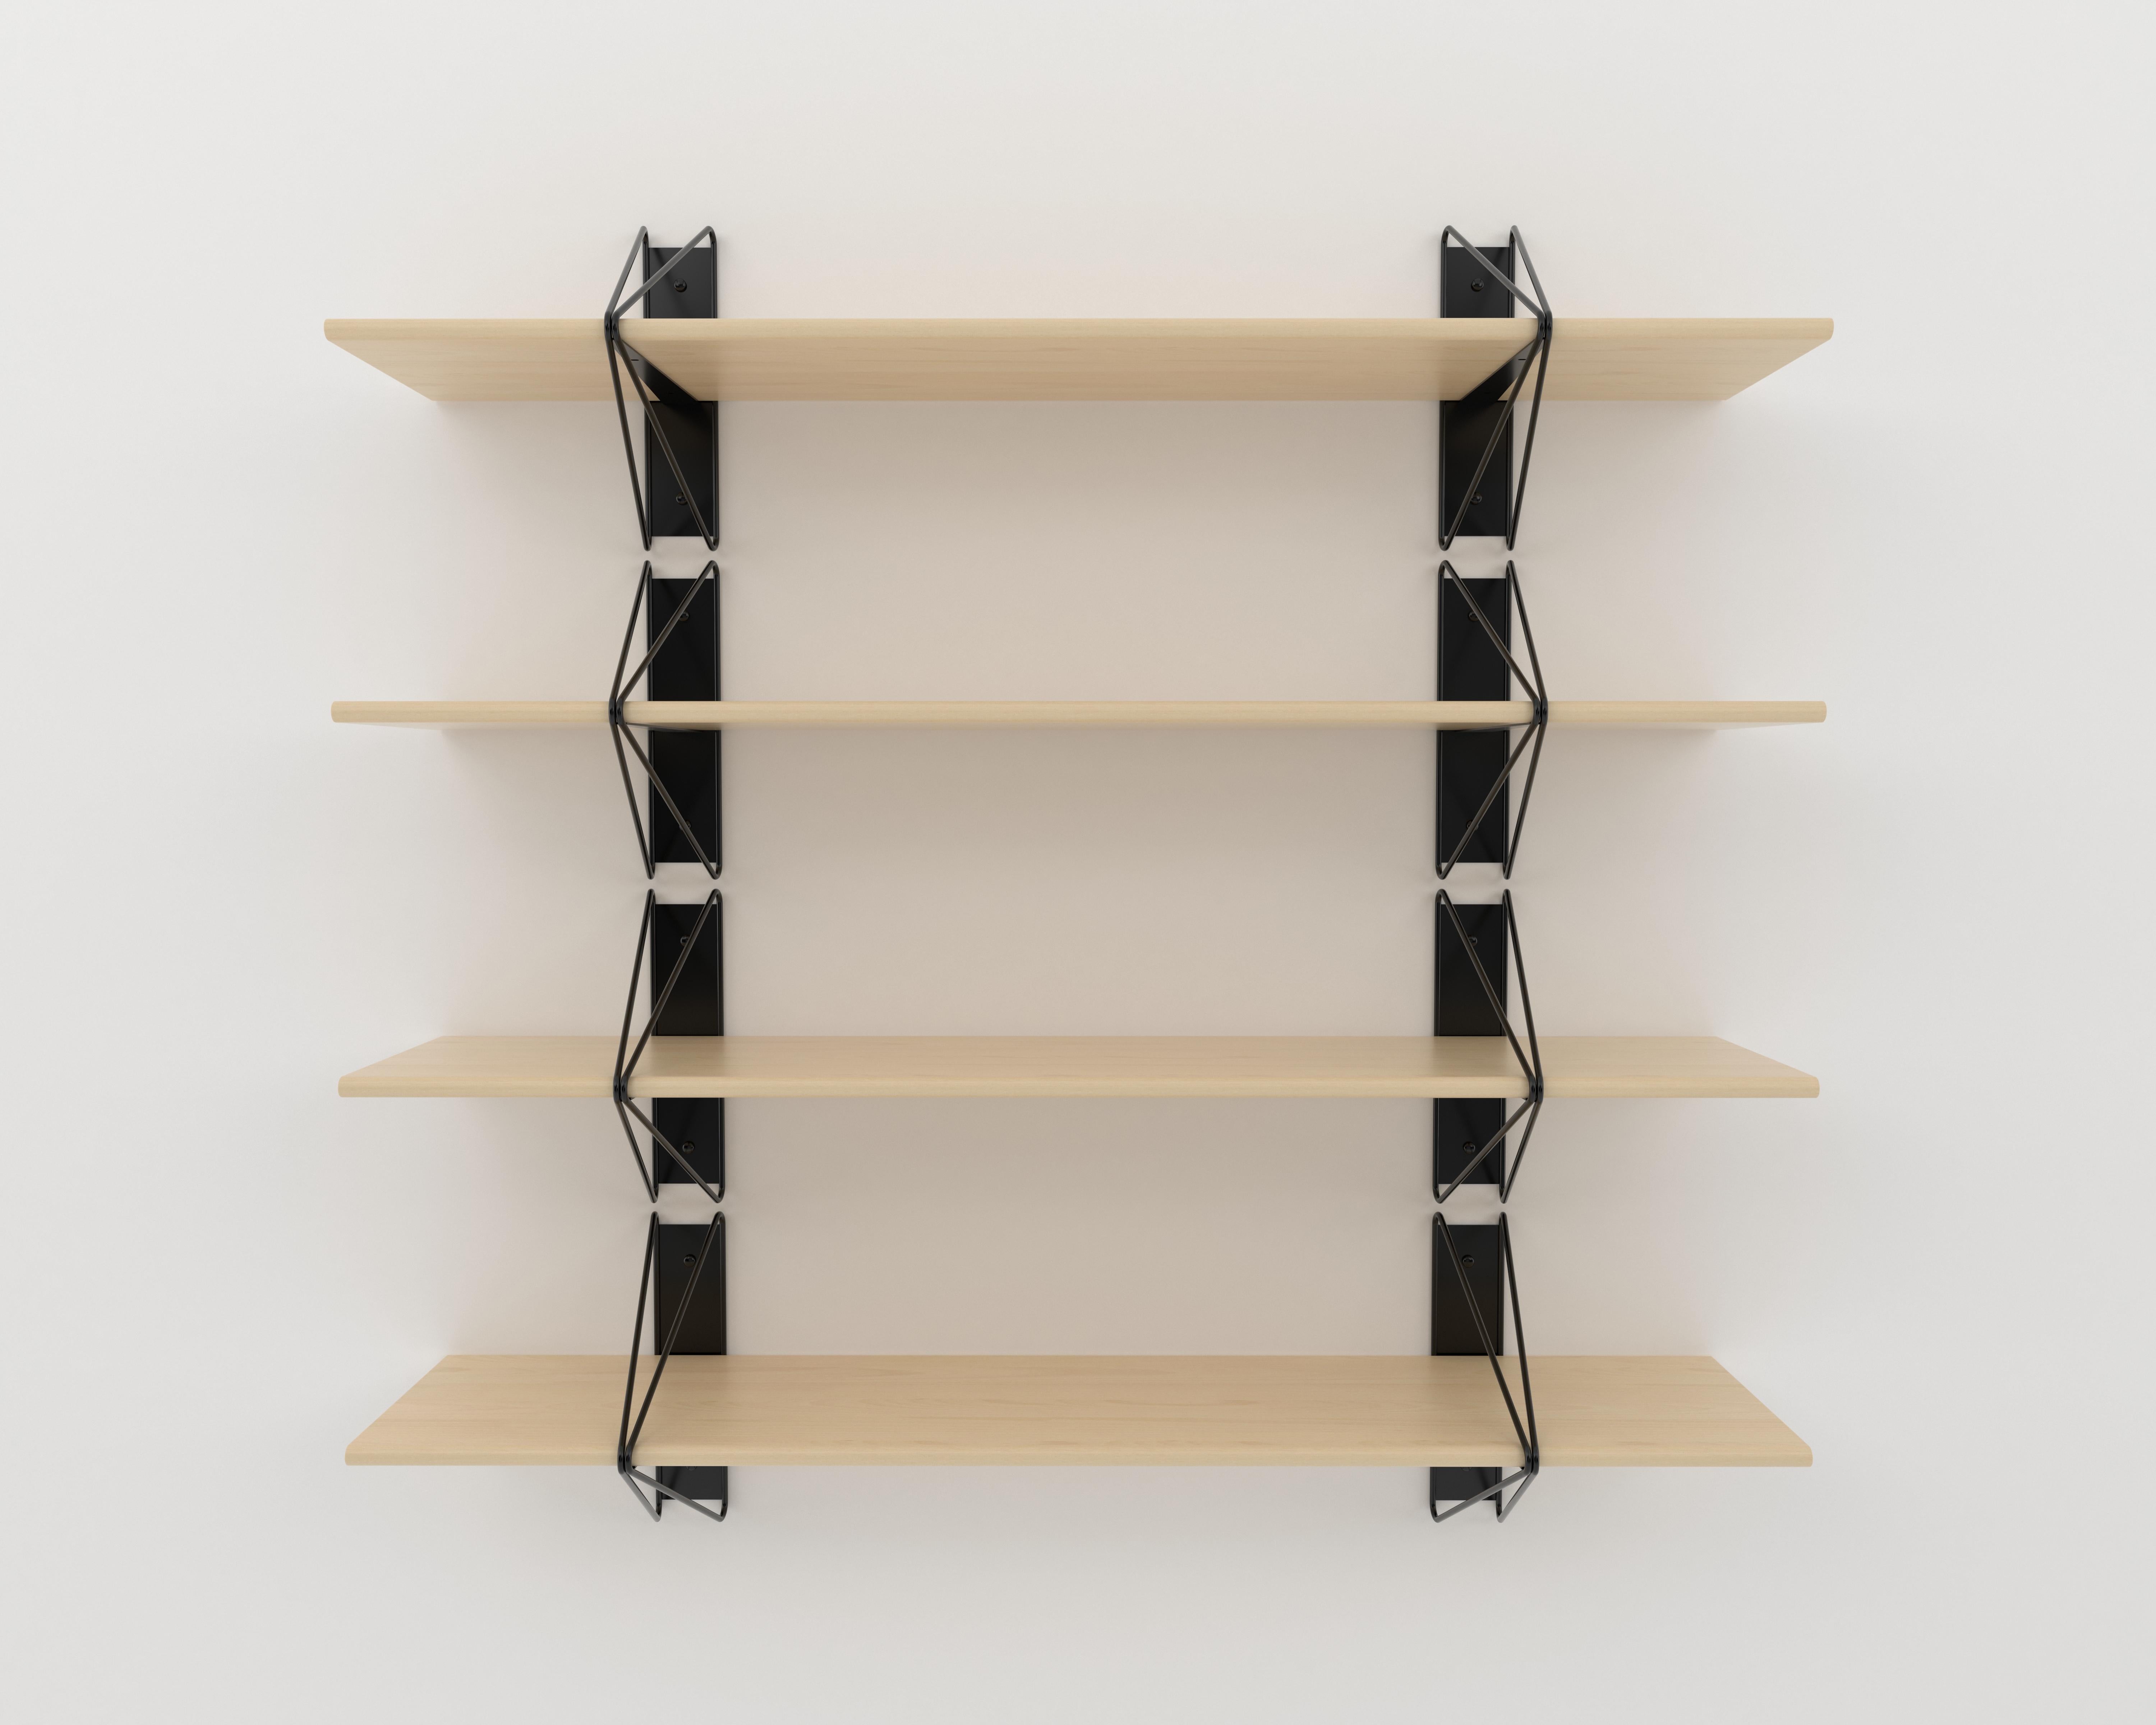 Oiled Set of 3 Strut Shelves from Souda, 84in, Black and Maple, Made to Order For Sale